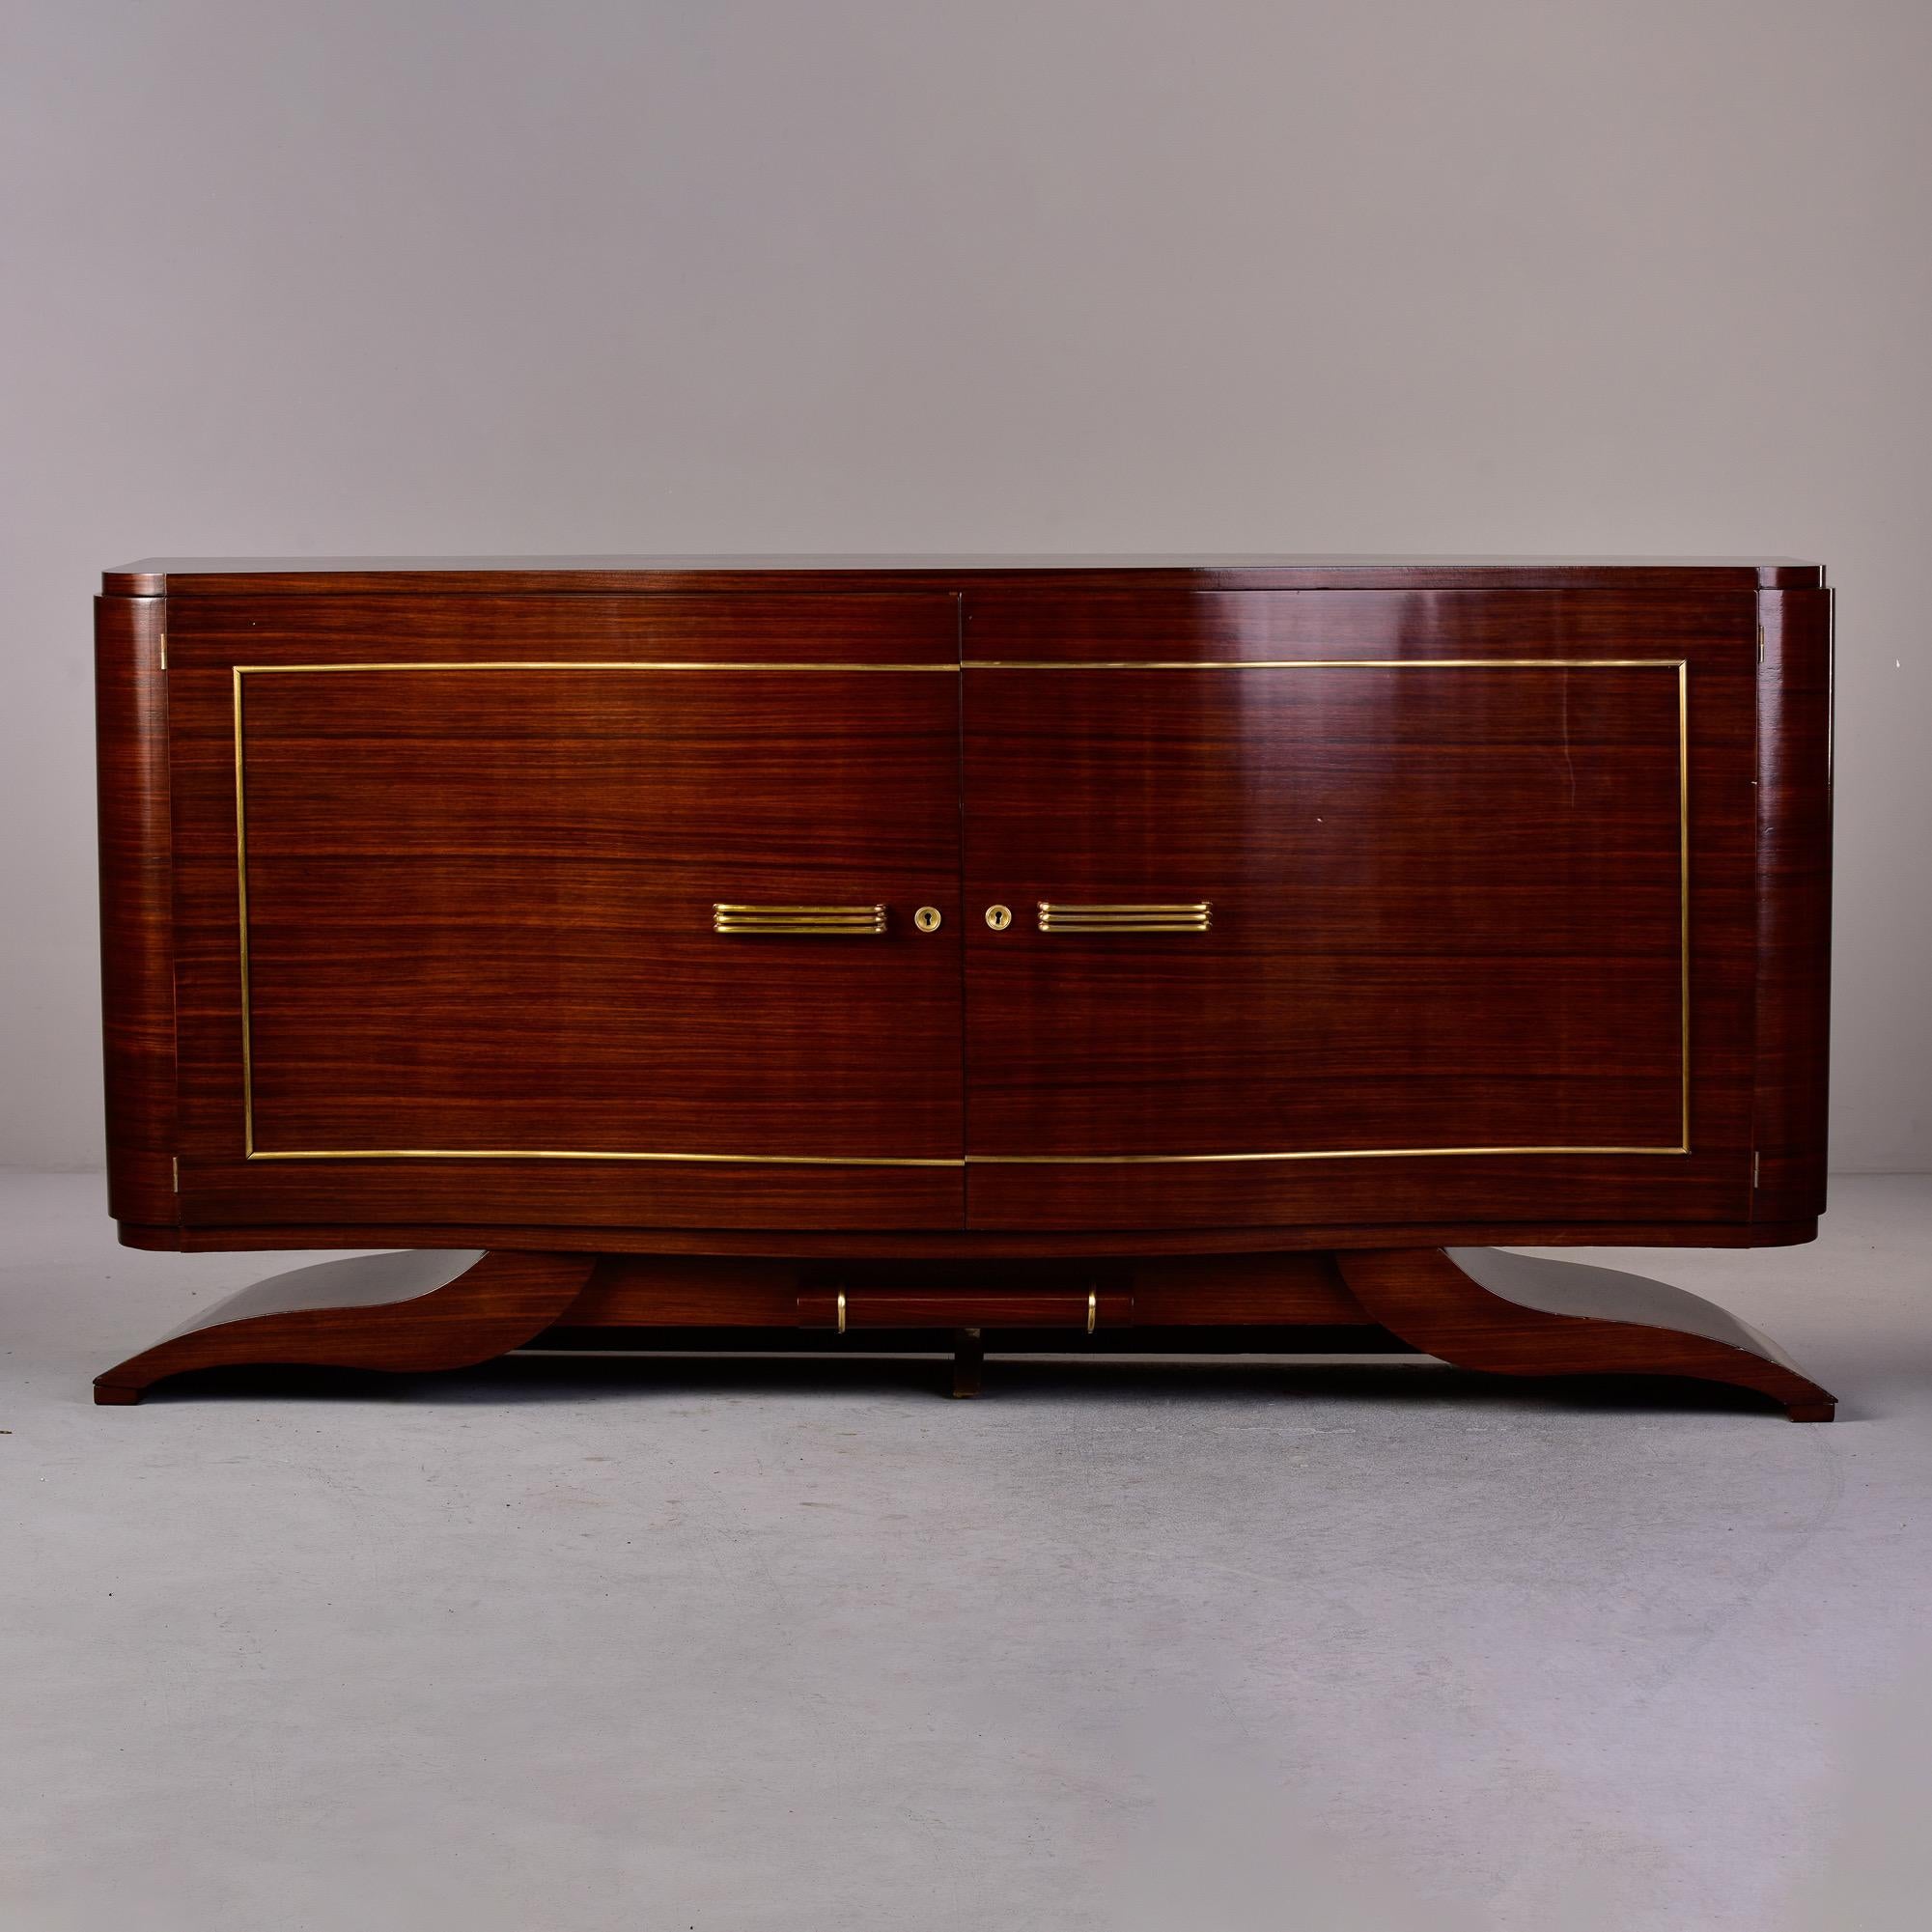 Circa 1940s French mahogany buffet with sleek, curvy Art Deco lines and brass trim. Locking cabinet opens to a slim top drawer on each side and storage with a single internal shelf on each side. Unknown maker.